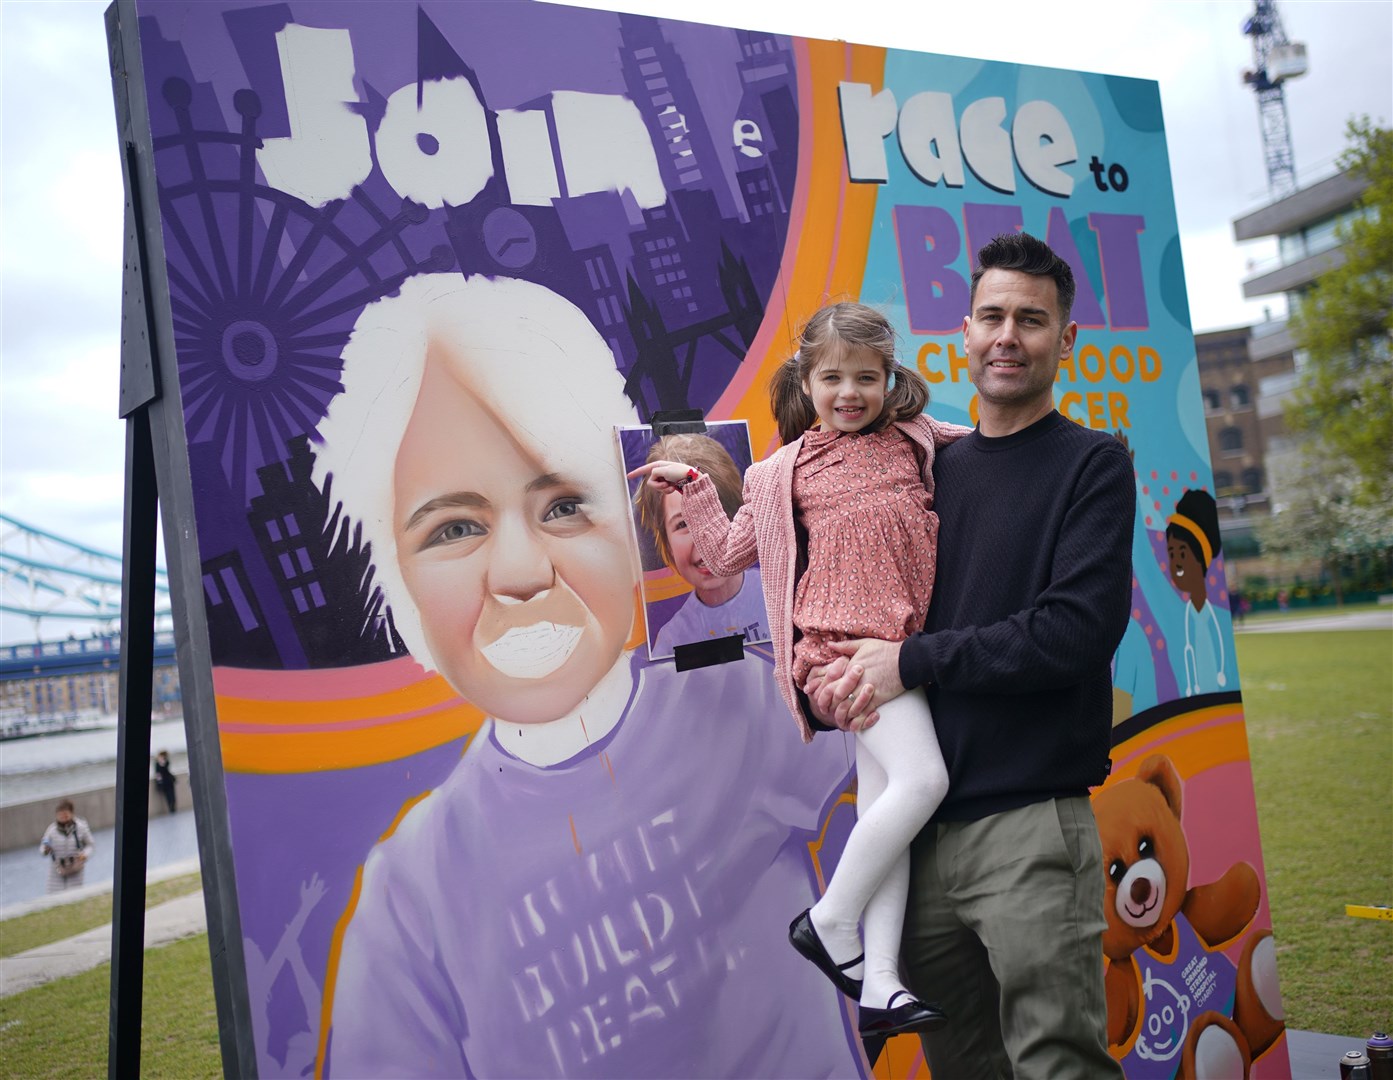 Six-year-old Sienna Halls with her father Gareth next to the mural at Potters Fields Park in London (Yui Mok/PA)